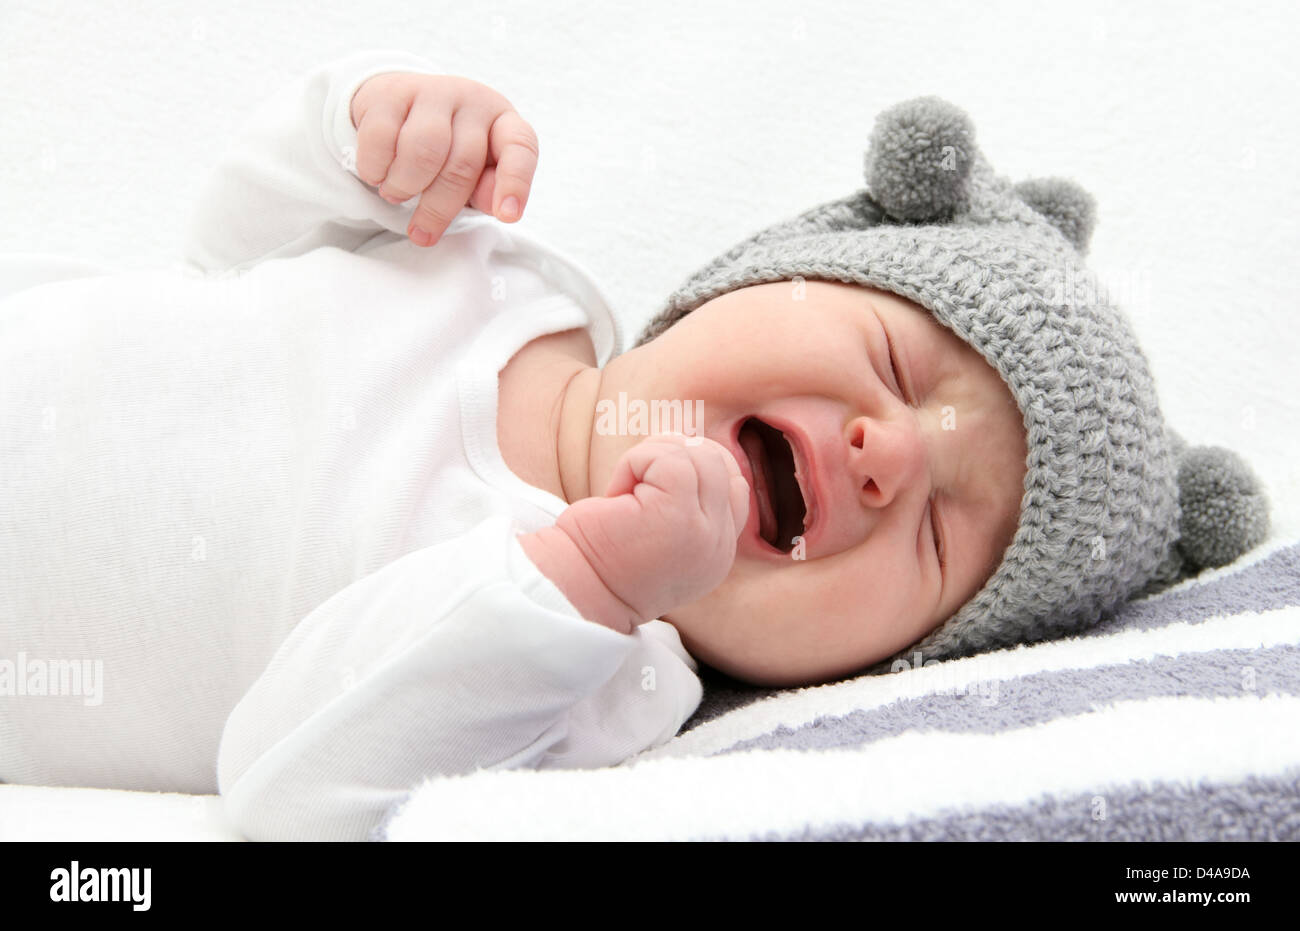 Little baby crying on bed Banque D'Images